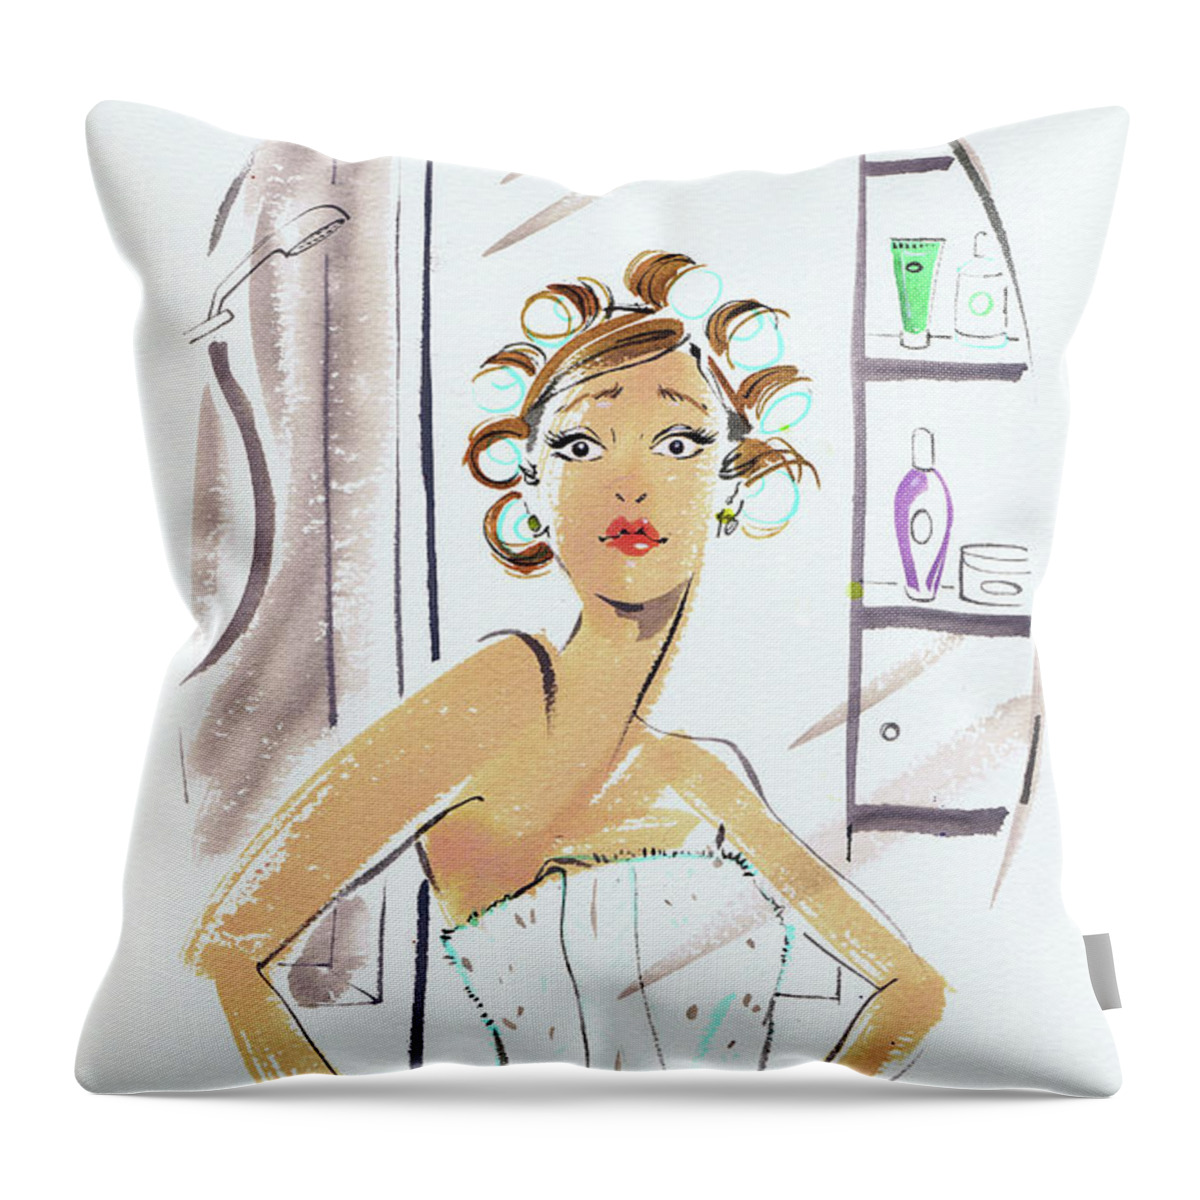 20-24 Years Throw Pillow featuring the painting Woman In Curlers And Towel Looking by Ikon Images